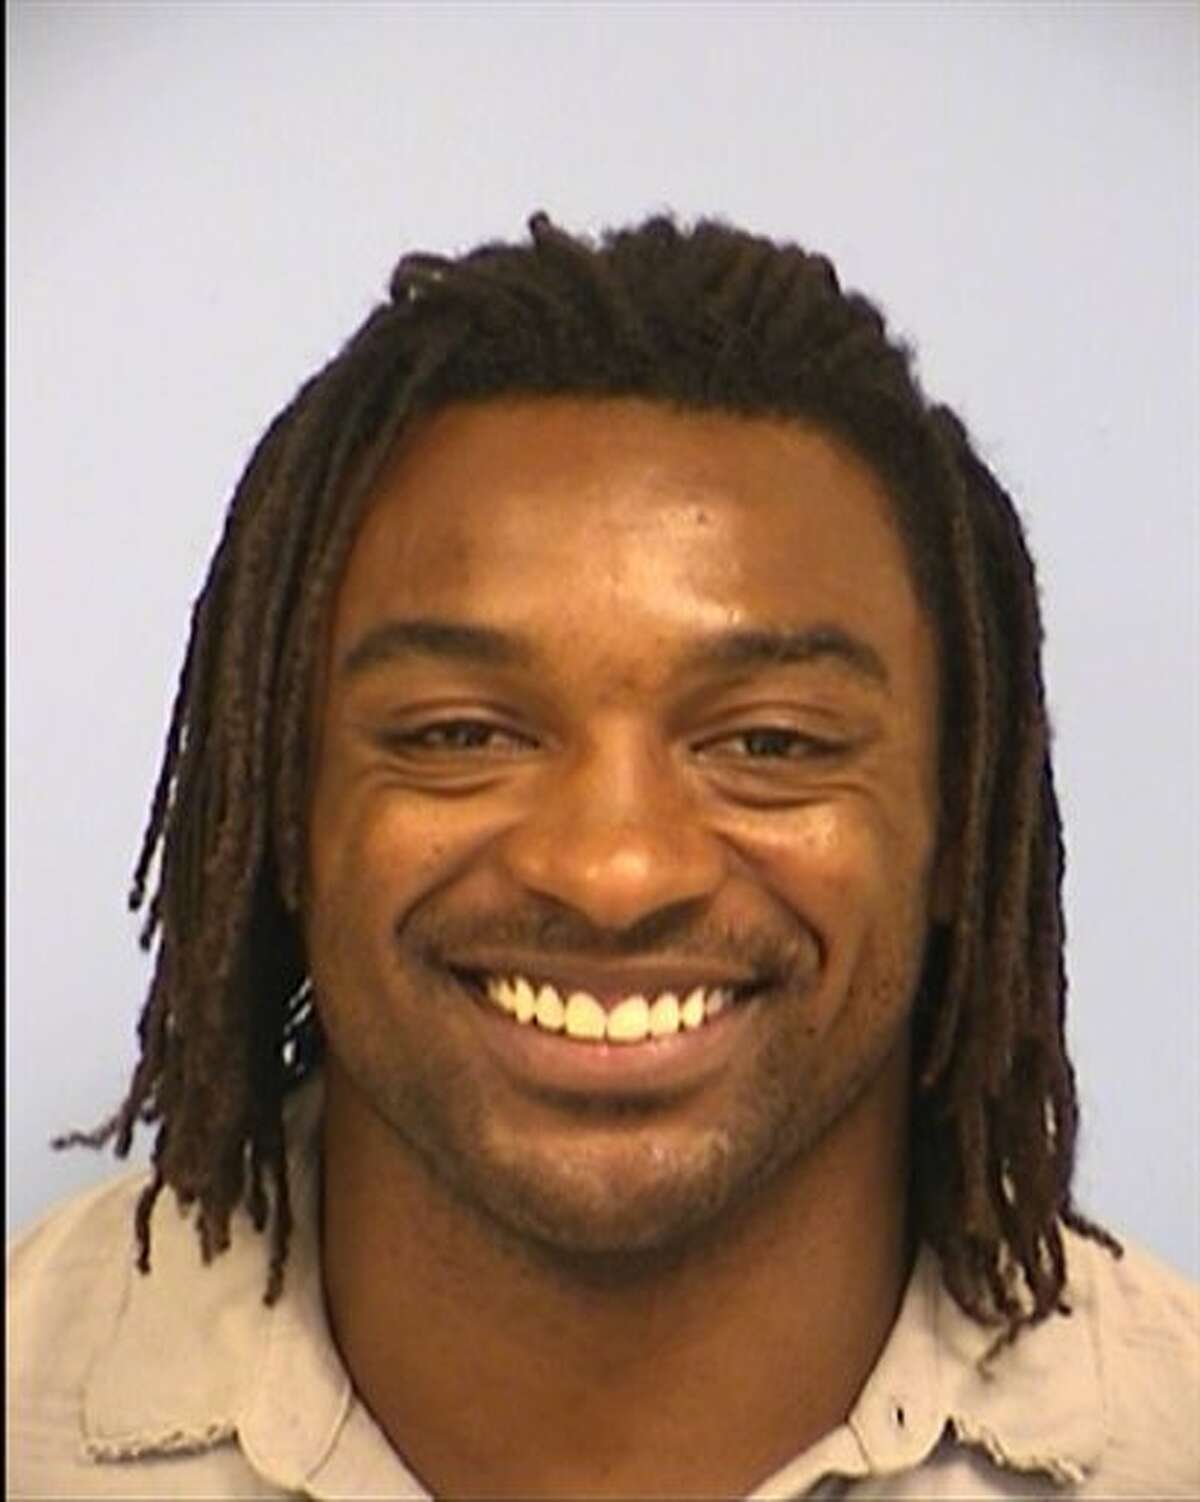 This undated mug shot provided by the Austin Police Department shows a booking photo of Cincinnati Bengals running back Cedric Benson. Benson was released from jail on Sunday, July 17, 2011, following an arrest on an assault charge, the second year in a row he has gotten into trouble in his home state. (AP Photo/Austin Police Department)